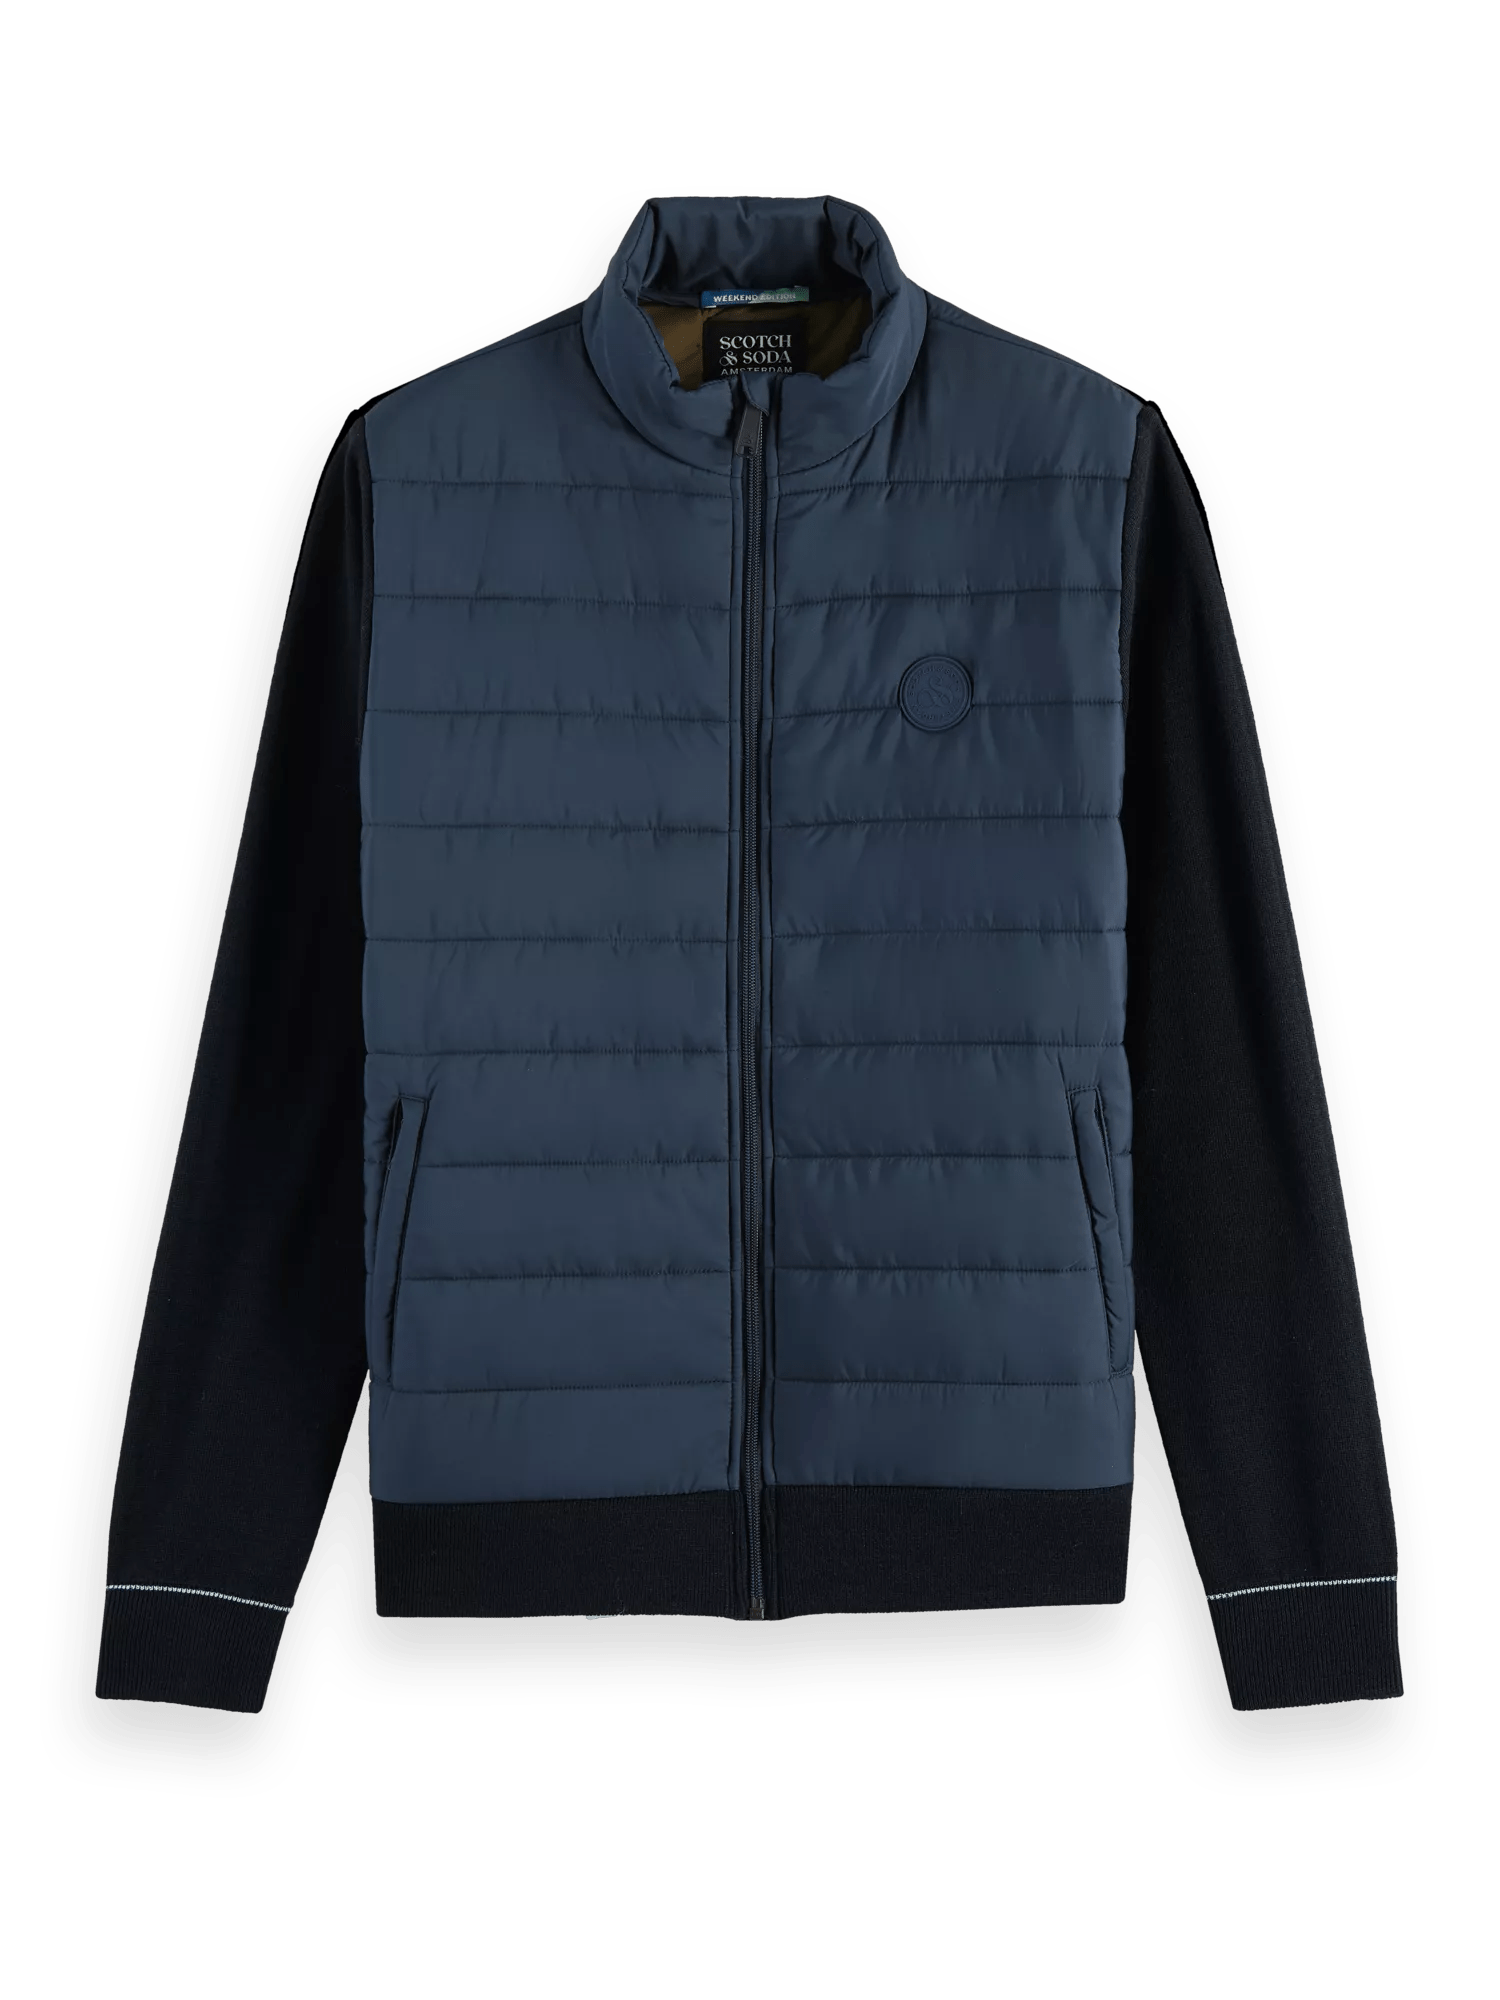 Scotch & Soda Padded jacket with knitted sleeves and back panel FNT